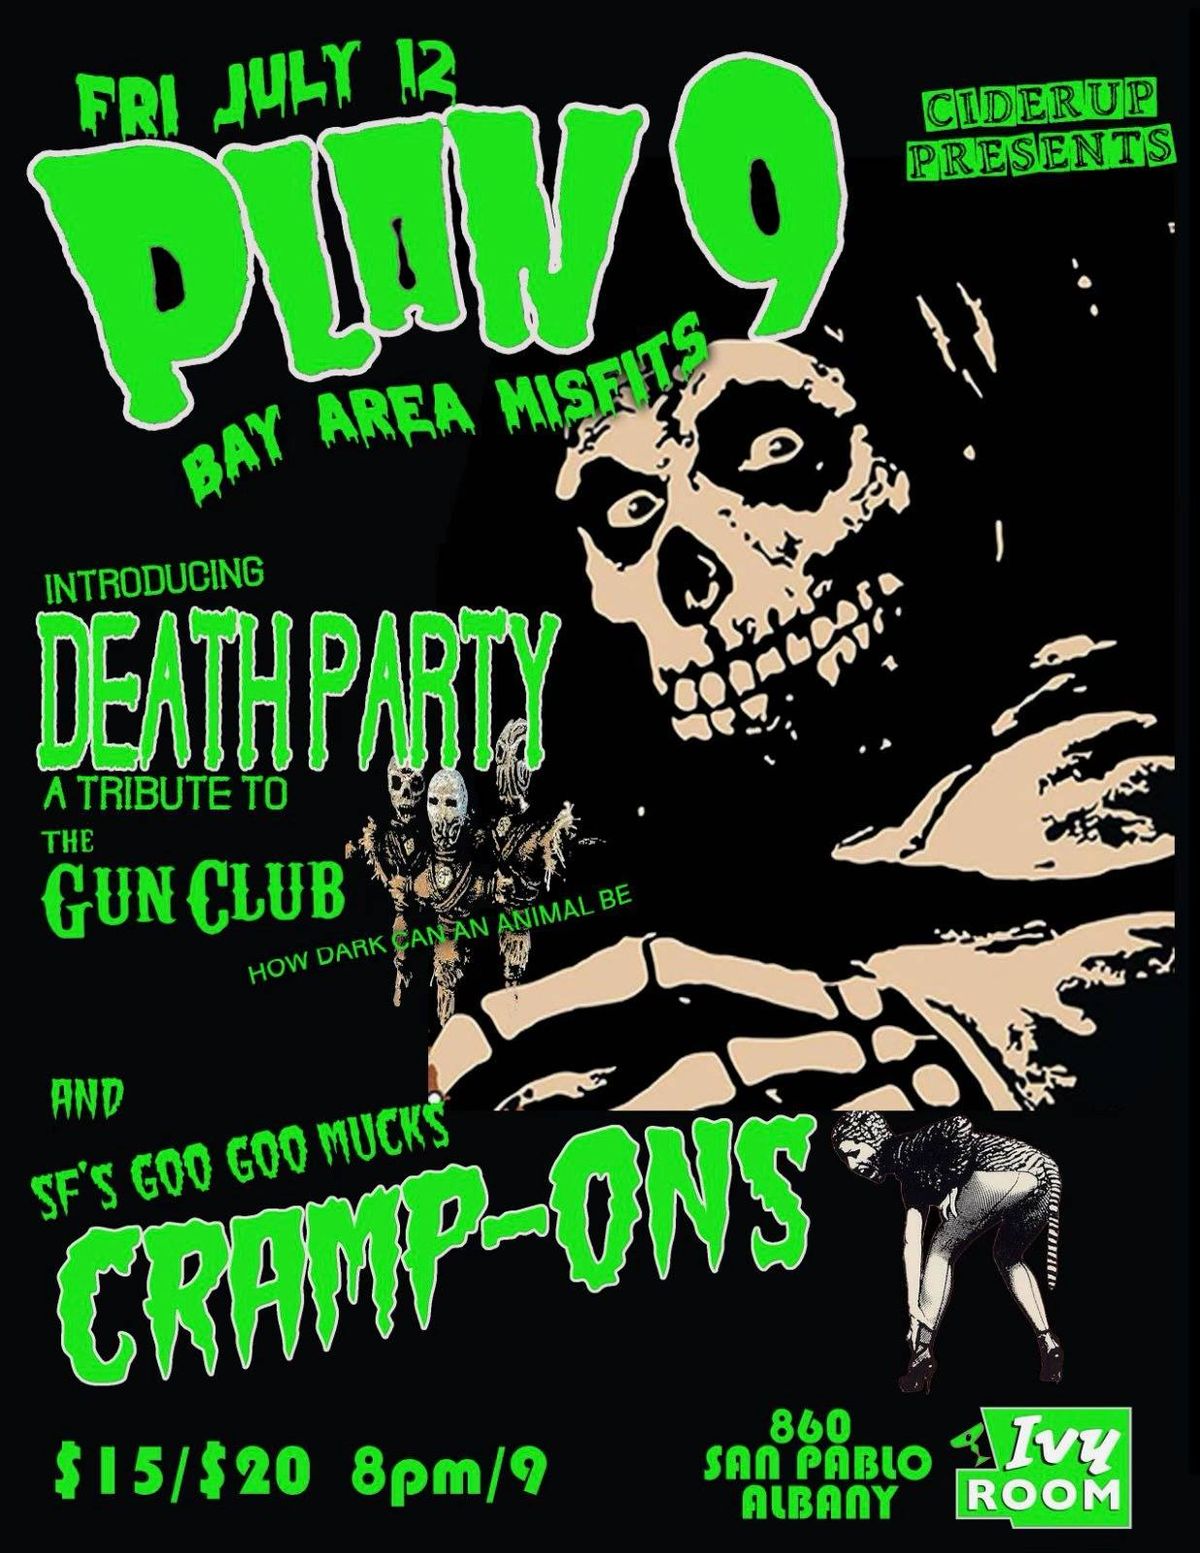 Ciderup Presents Plan 9 with DEATH PARTY & Cramp-ons